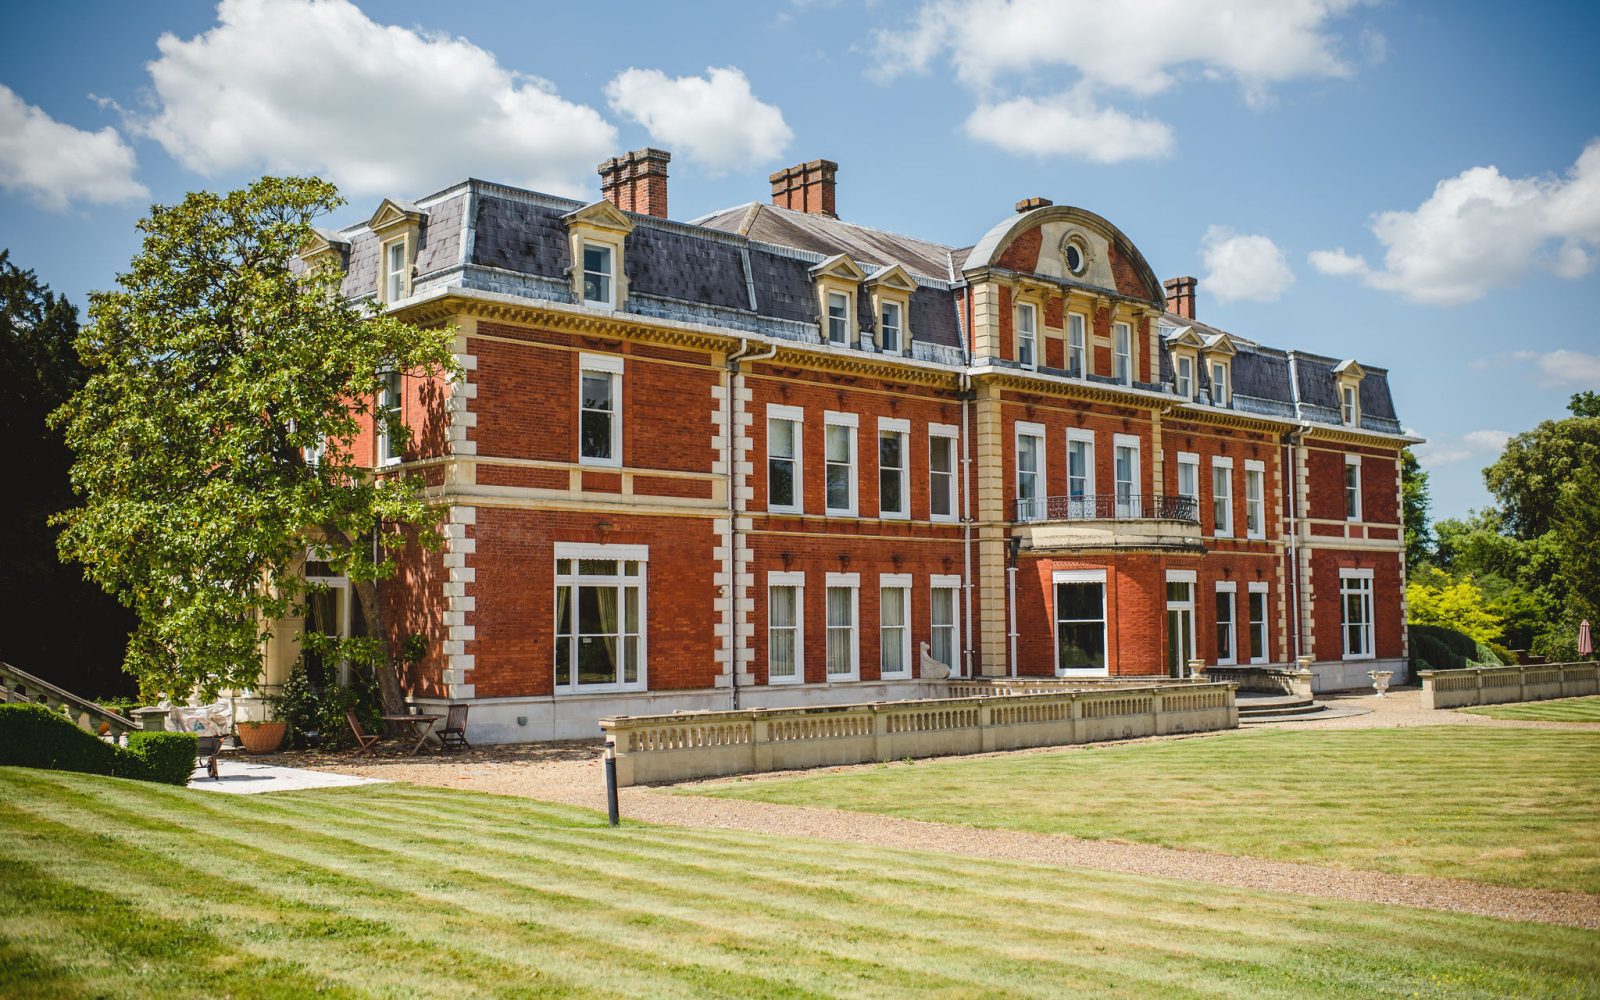 Landscaped grounds and picturesque gardens at Fetcham Park's serviced offices in Leatherhead